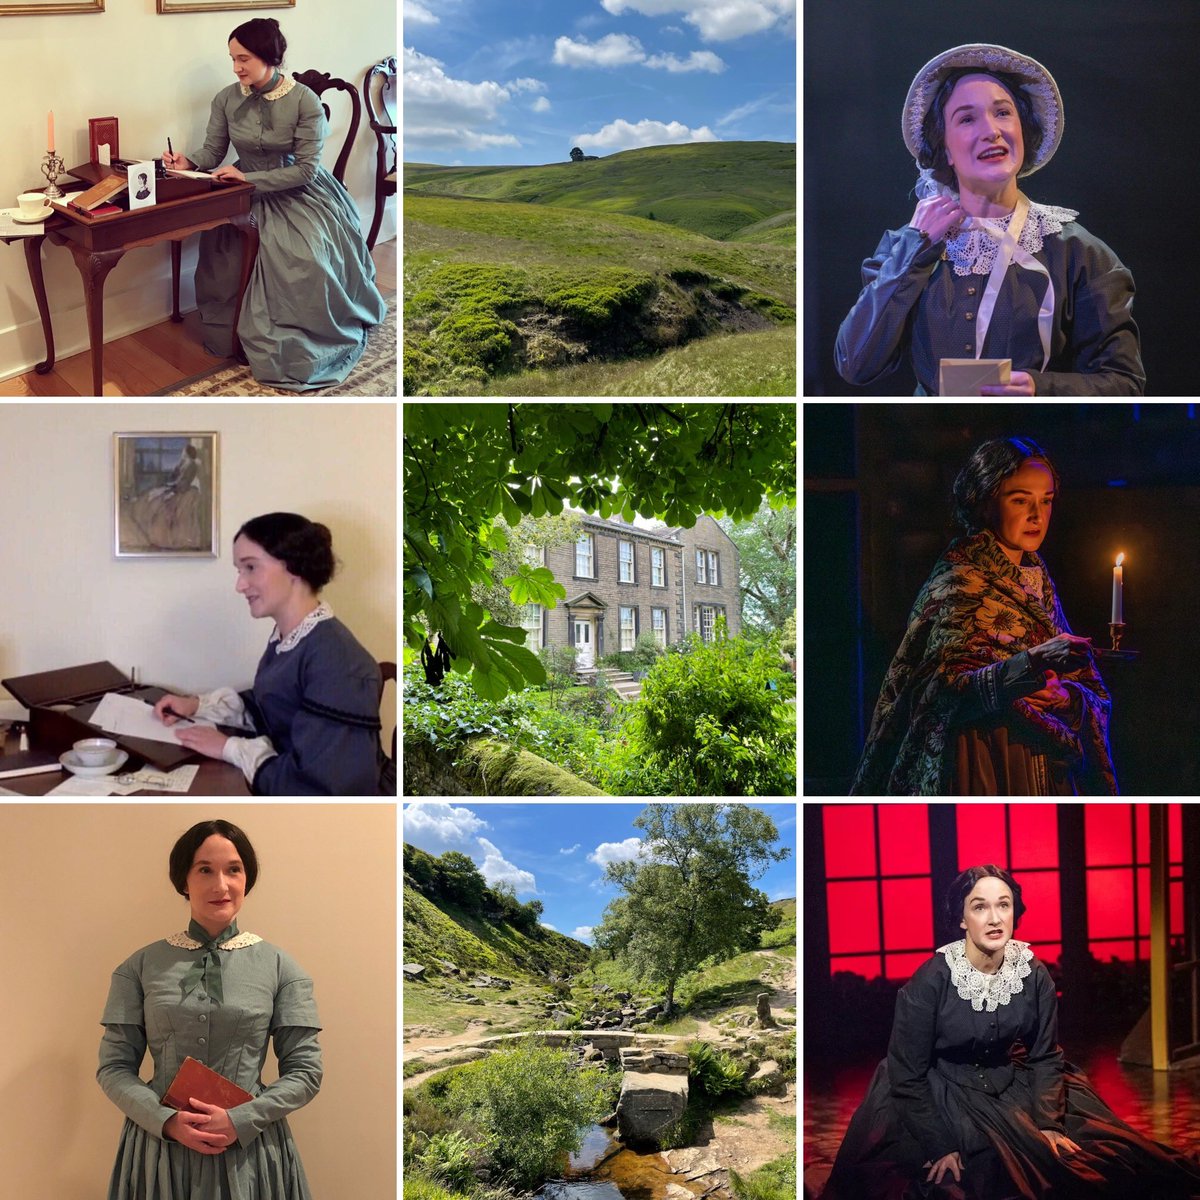 #OTD in 1816 the brilliant novelist #CharlotteBronte was born. I am forever grateful for the solace her #novels have given me, the illumination I have found in researching her life and work, and the great honor and thrill it has been to play her and her heroine #JaneEyre on stage